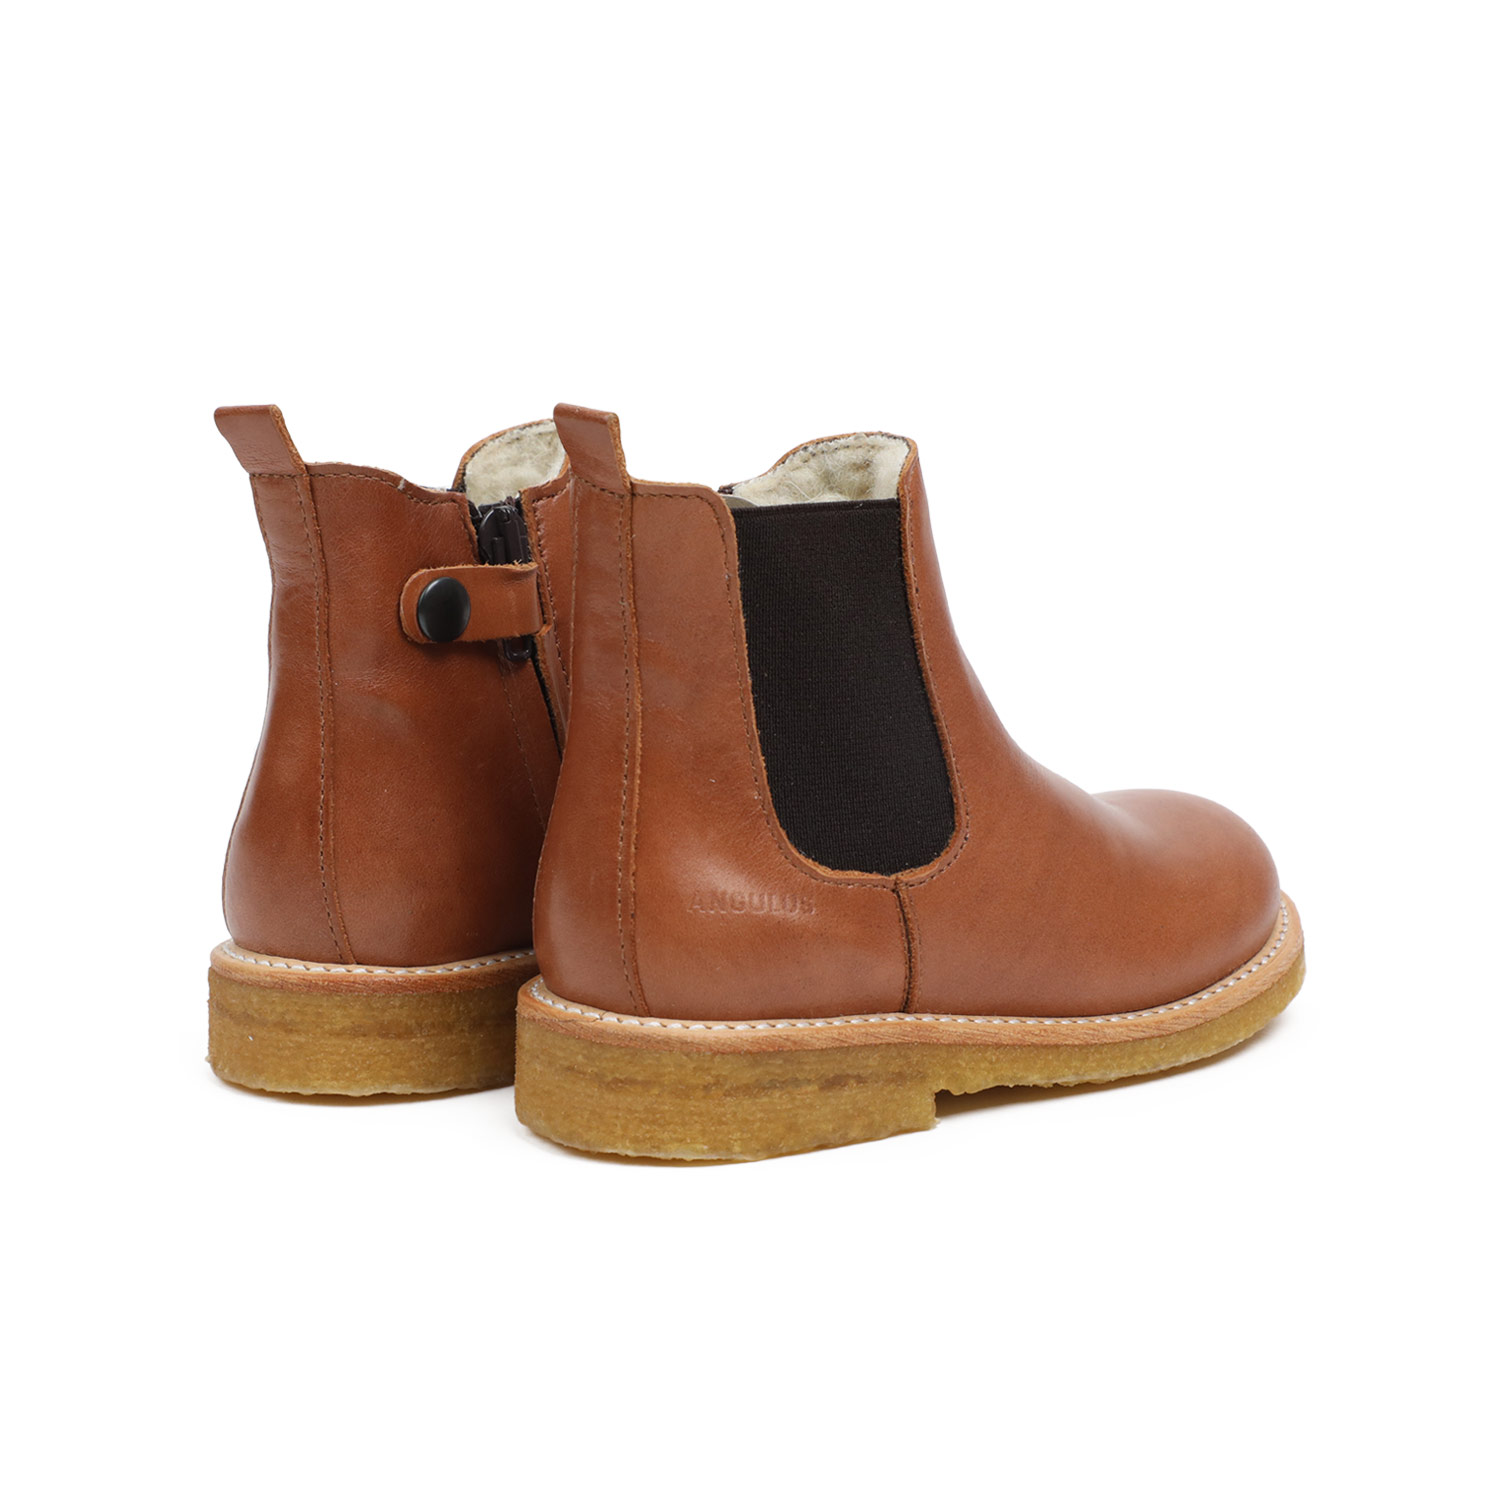 Angulus kids Chelsea boot with wool lining Cognac Sydney AU